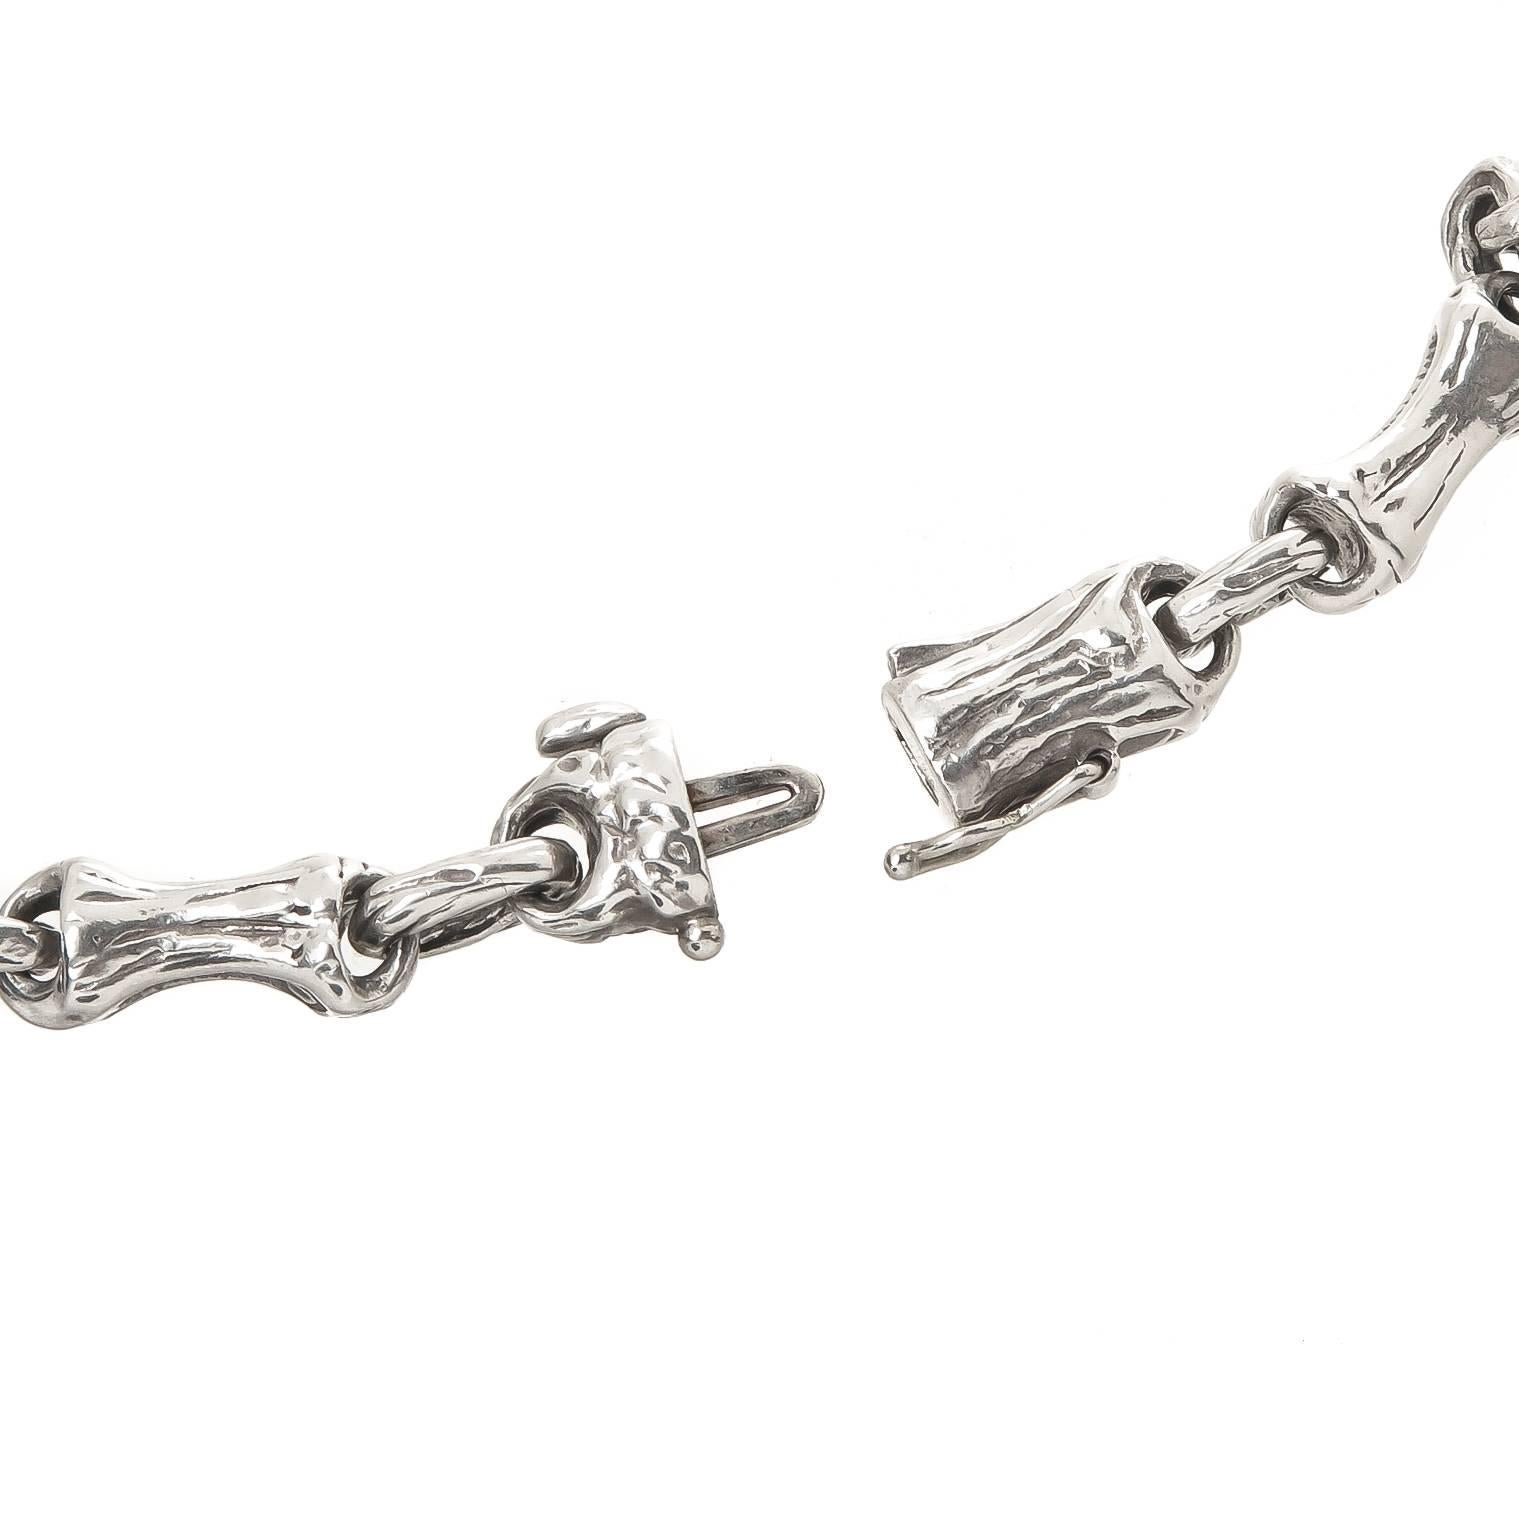 Circa 1980s Tiffany & Co. Bamboo collection Sterling Silver Necklace, measuring 16 1/2 inches in length, 3/16 inch wide and having solid links with a total weight of 2 ounces. Can also be double wrapped around the wrist to wear as a bracelet.